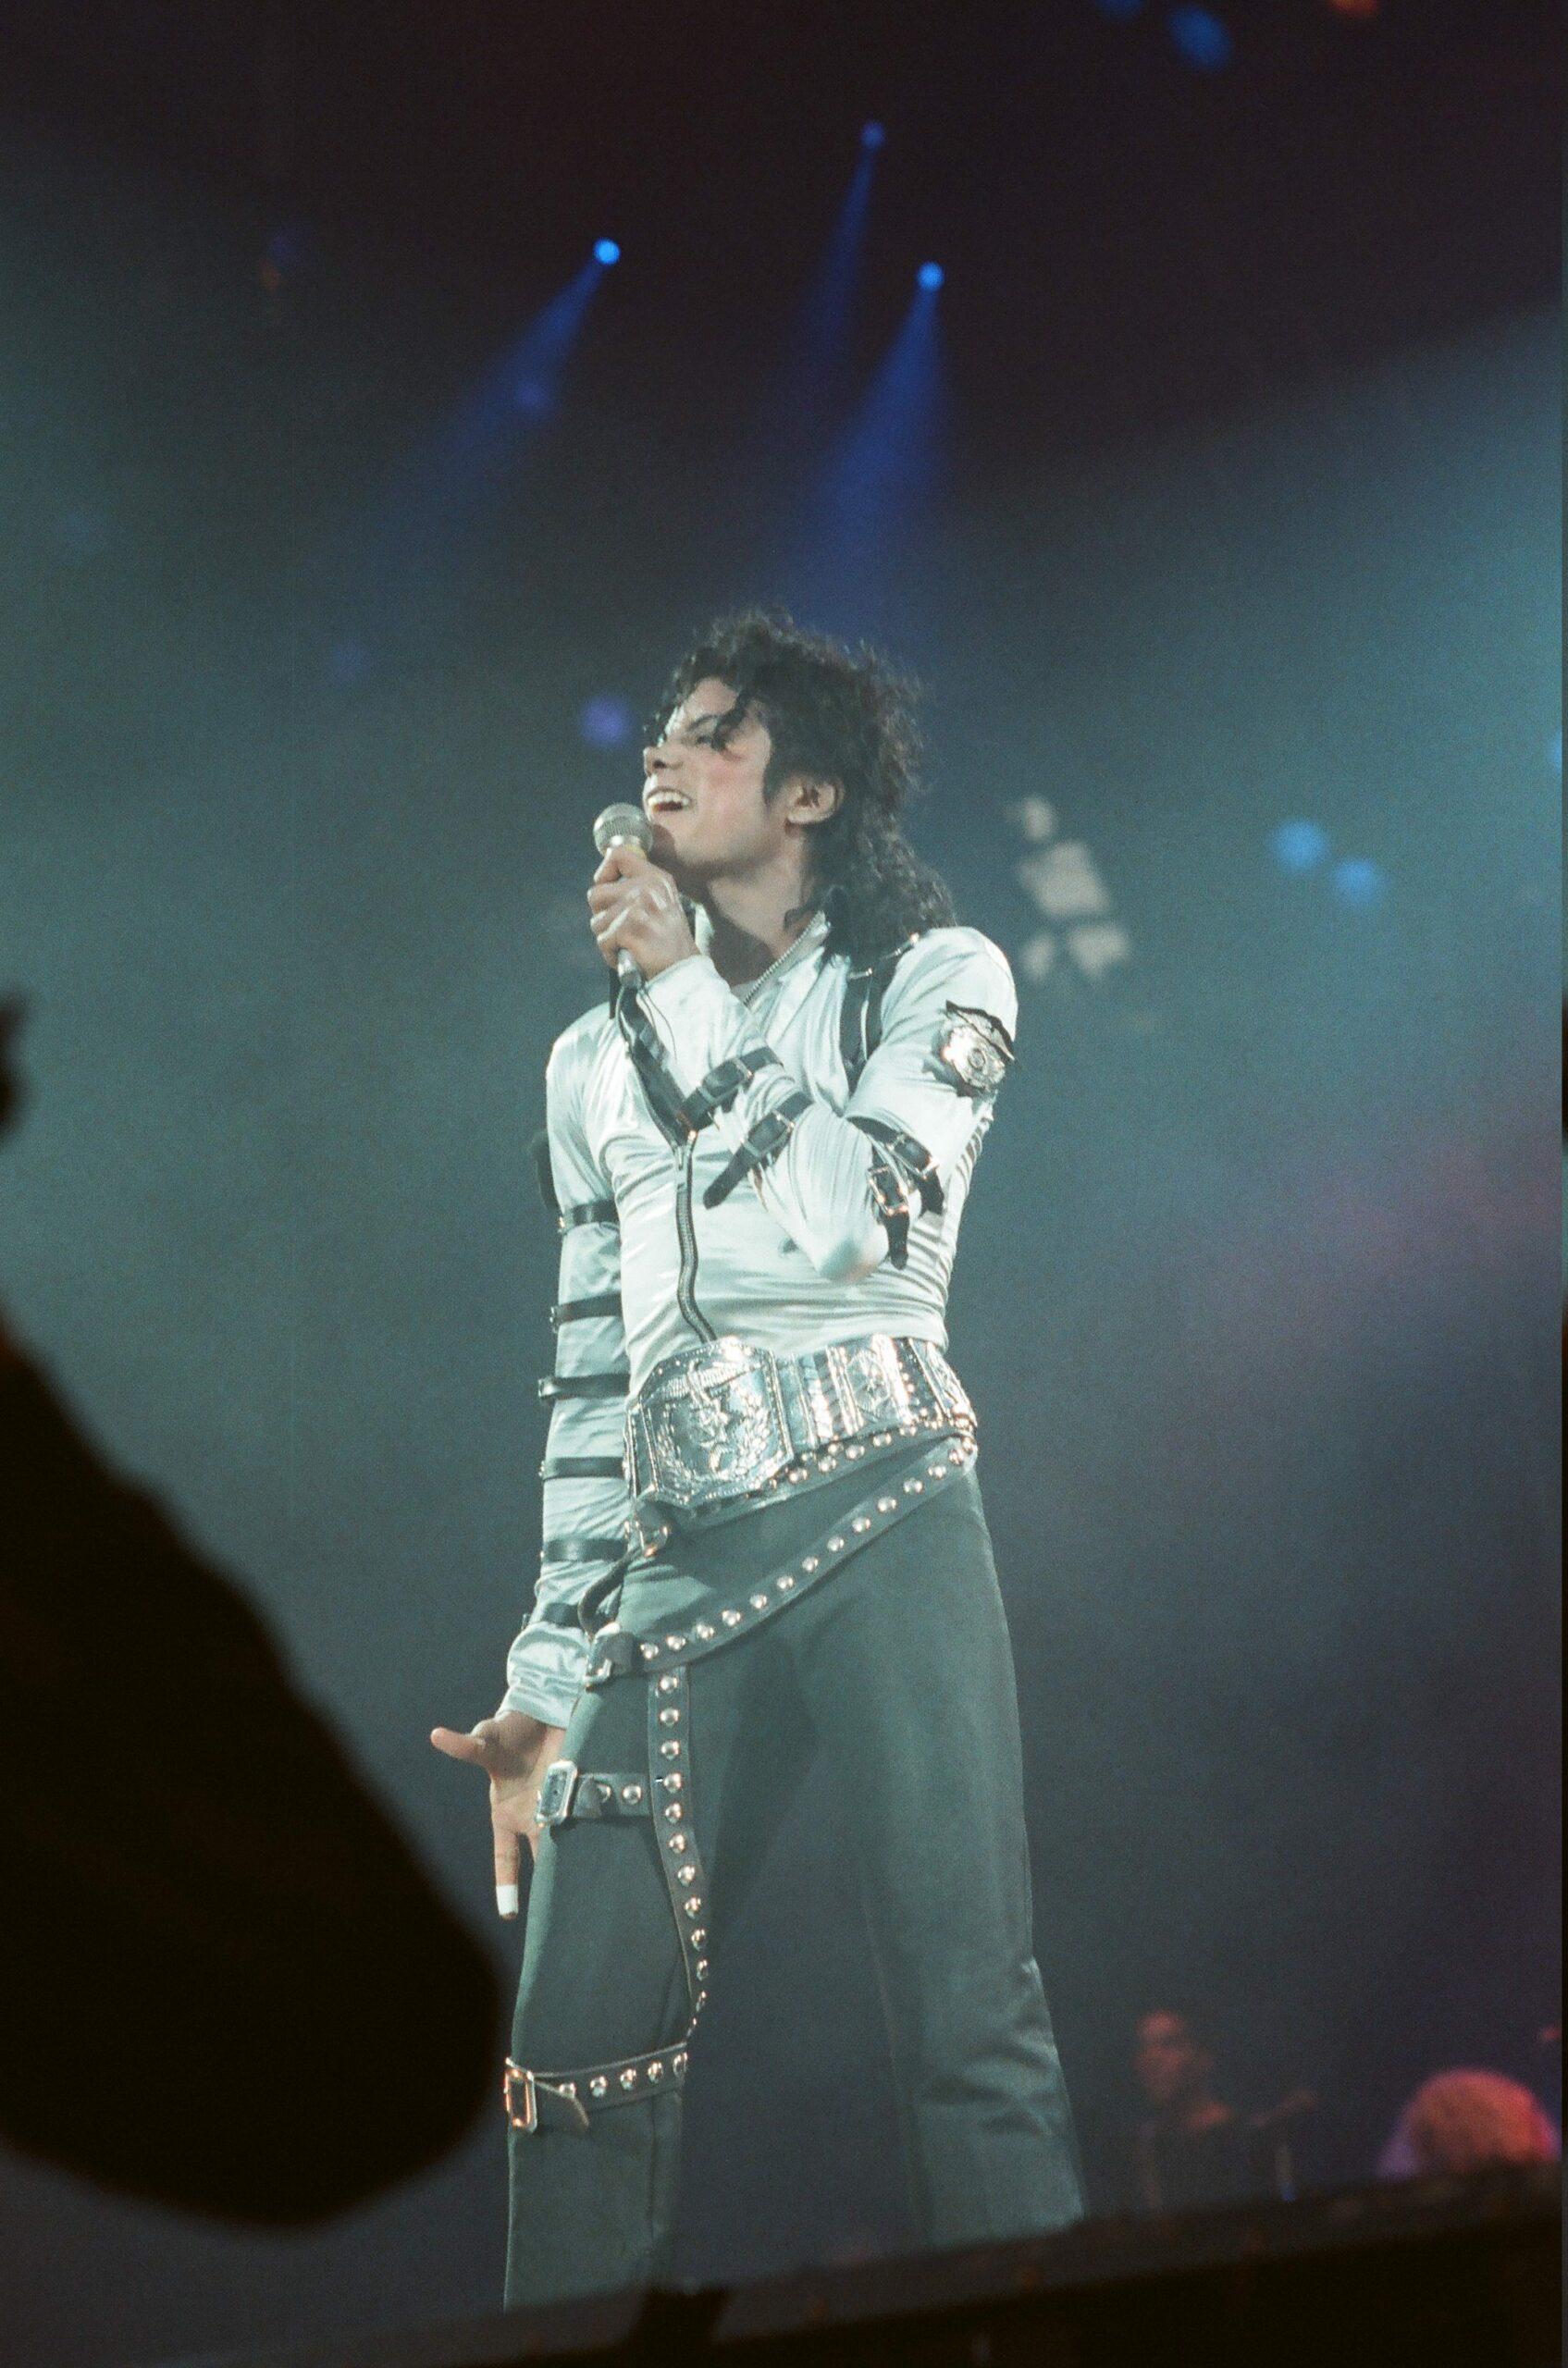 Michael Jackson in concert at Wembley performing in front of HRH Diana Princess of Wales on 16th July 1988